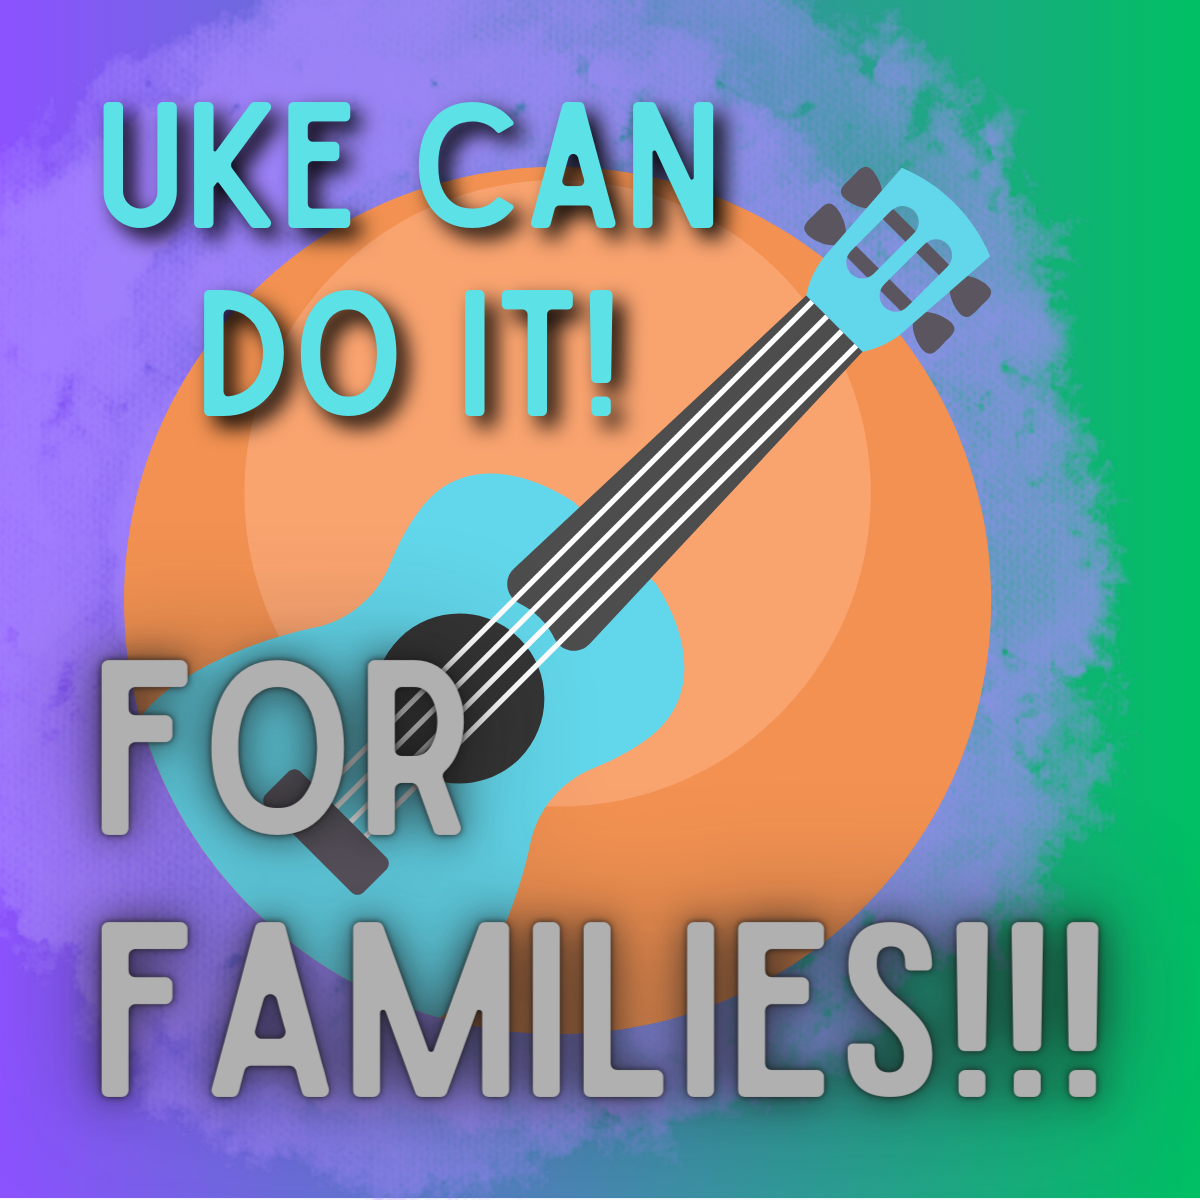 Image of a colorful ukulele with the words Uke Can Do It! for Families!!!